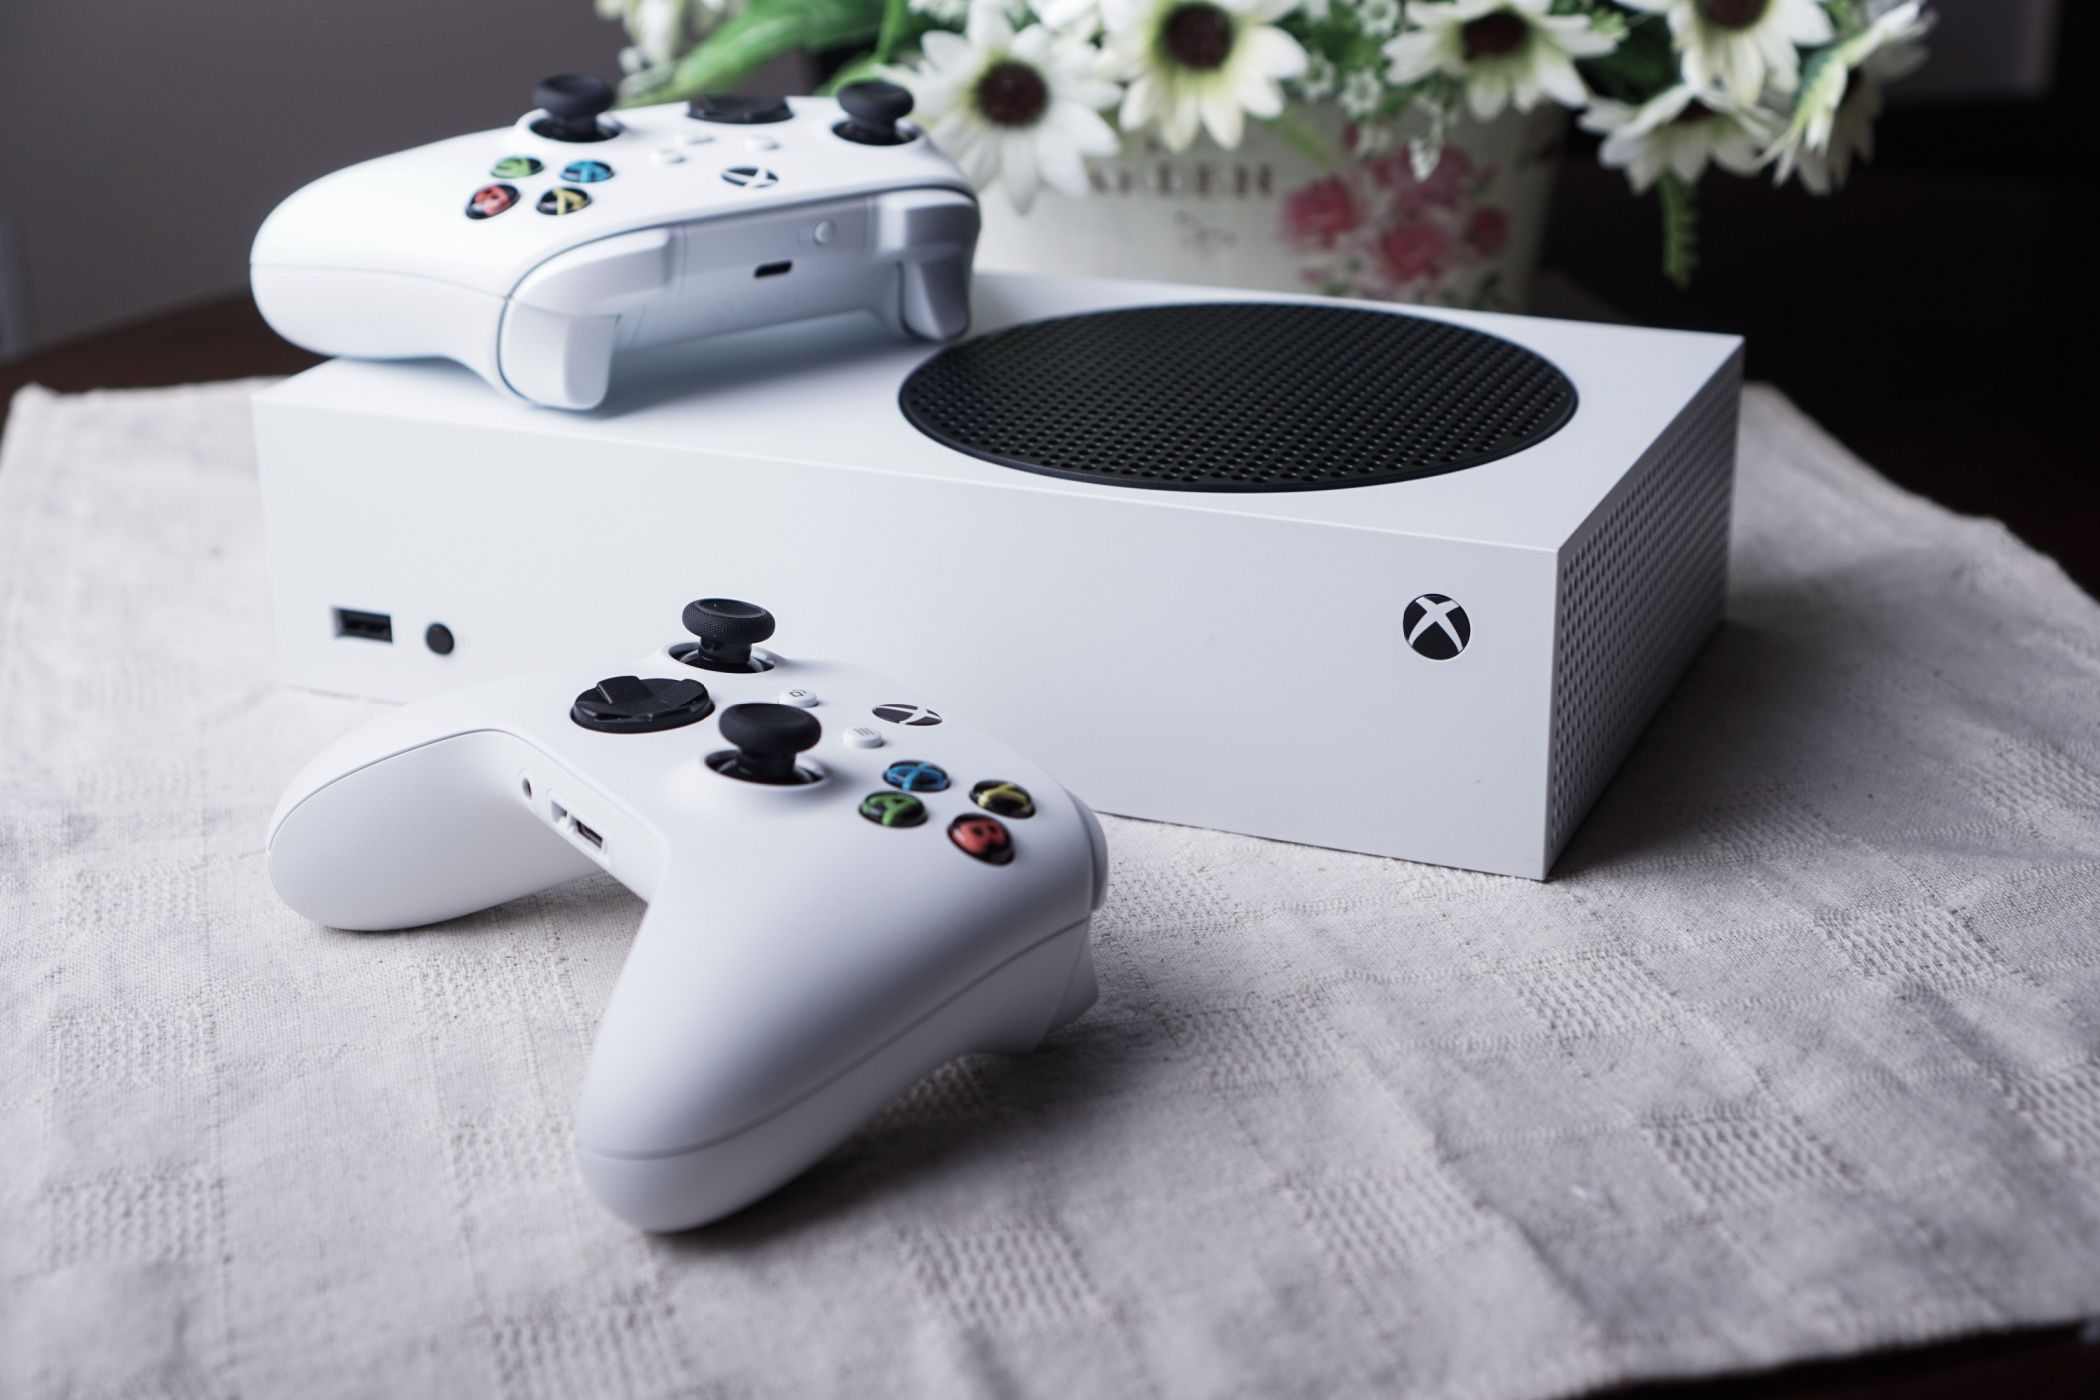 A Series S console on a table with two controllers and a vase of flowers.